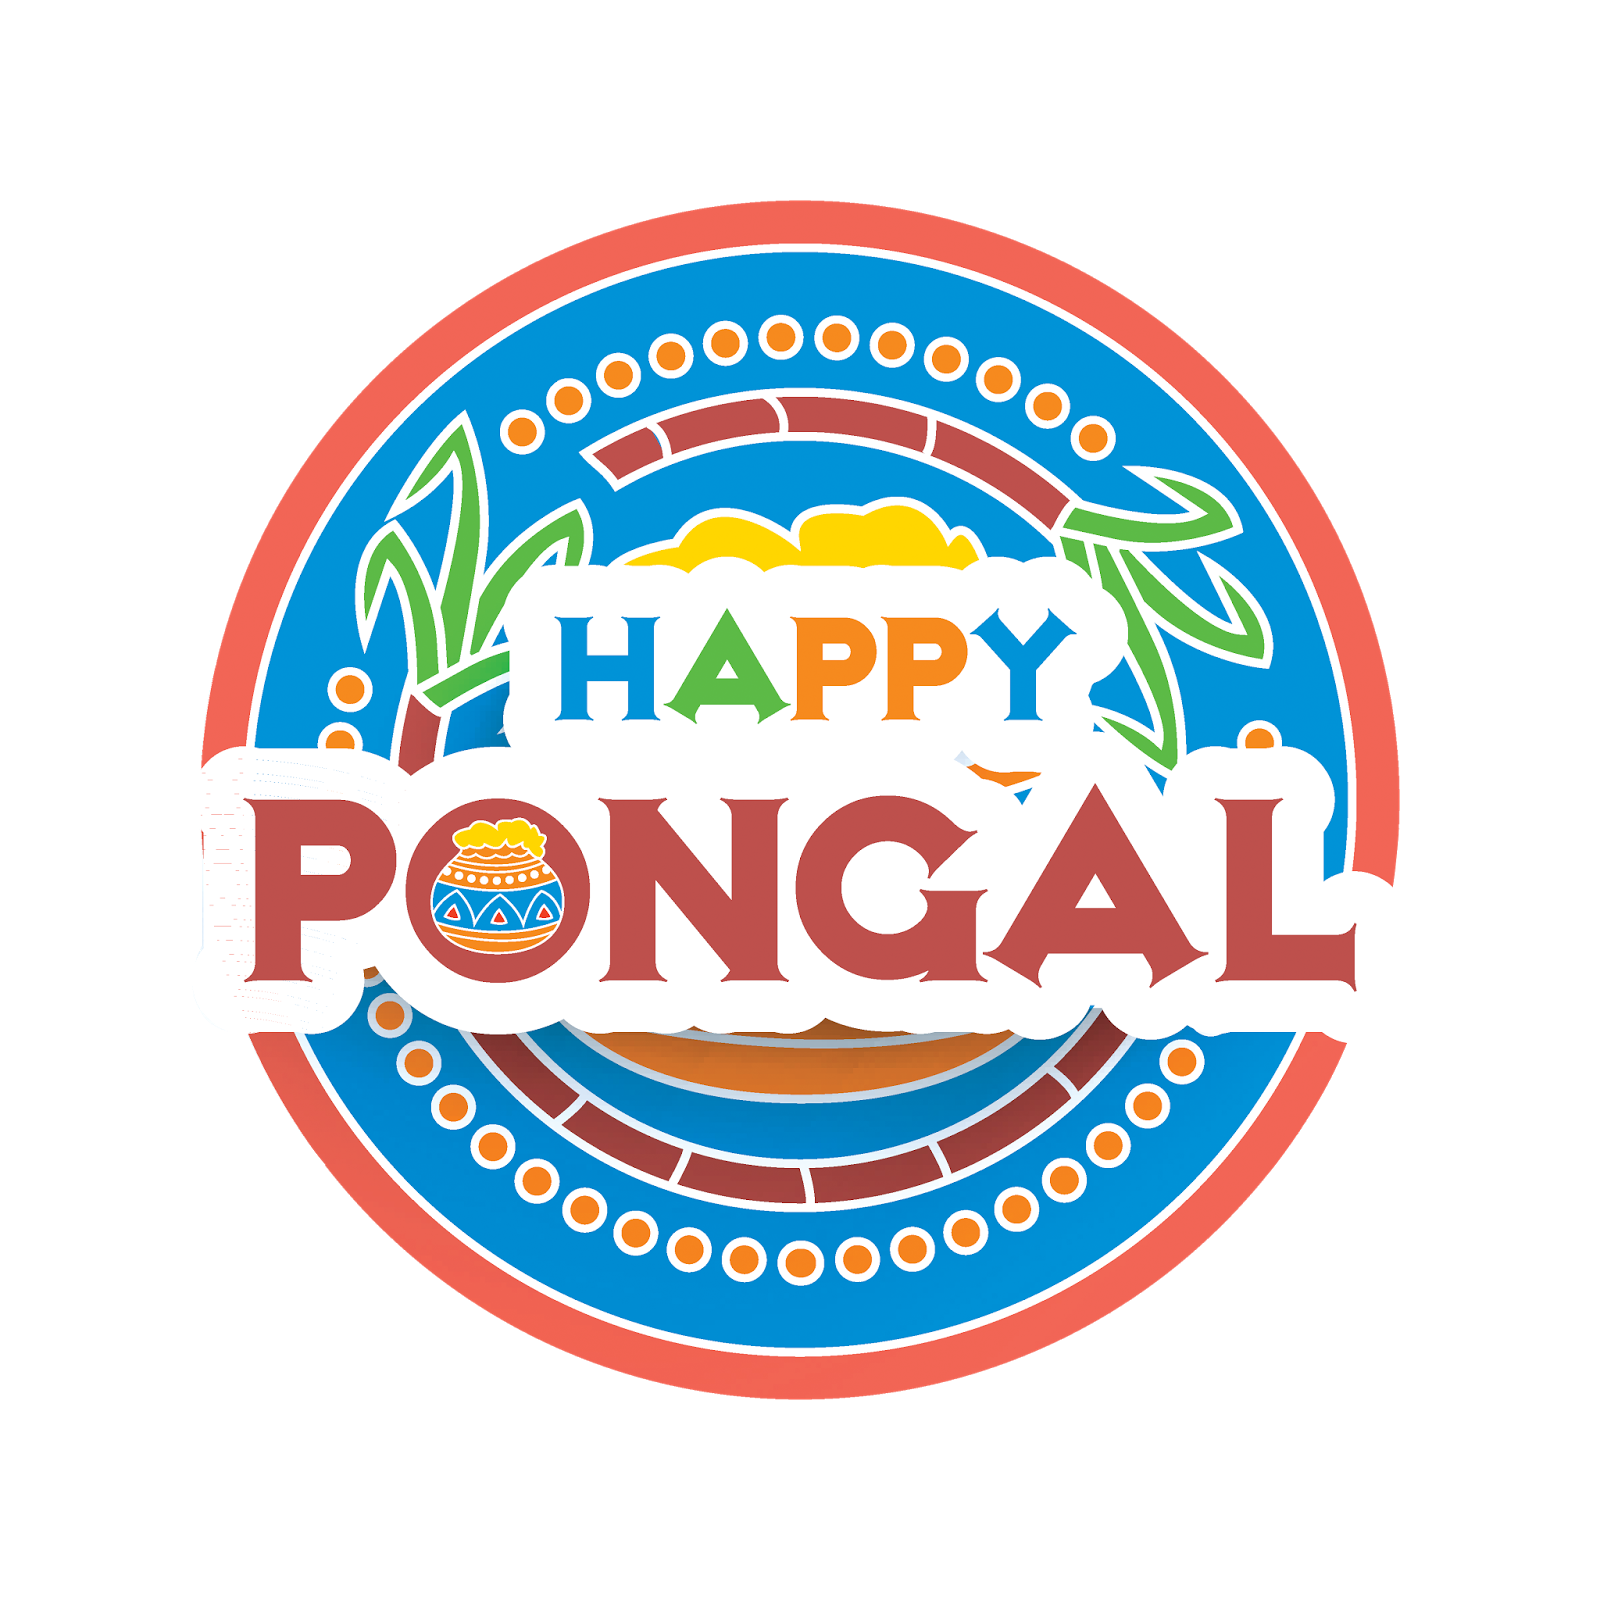  happy pongal round lable ping vector image free downloads naveengfx